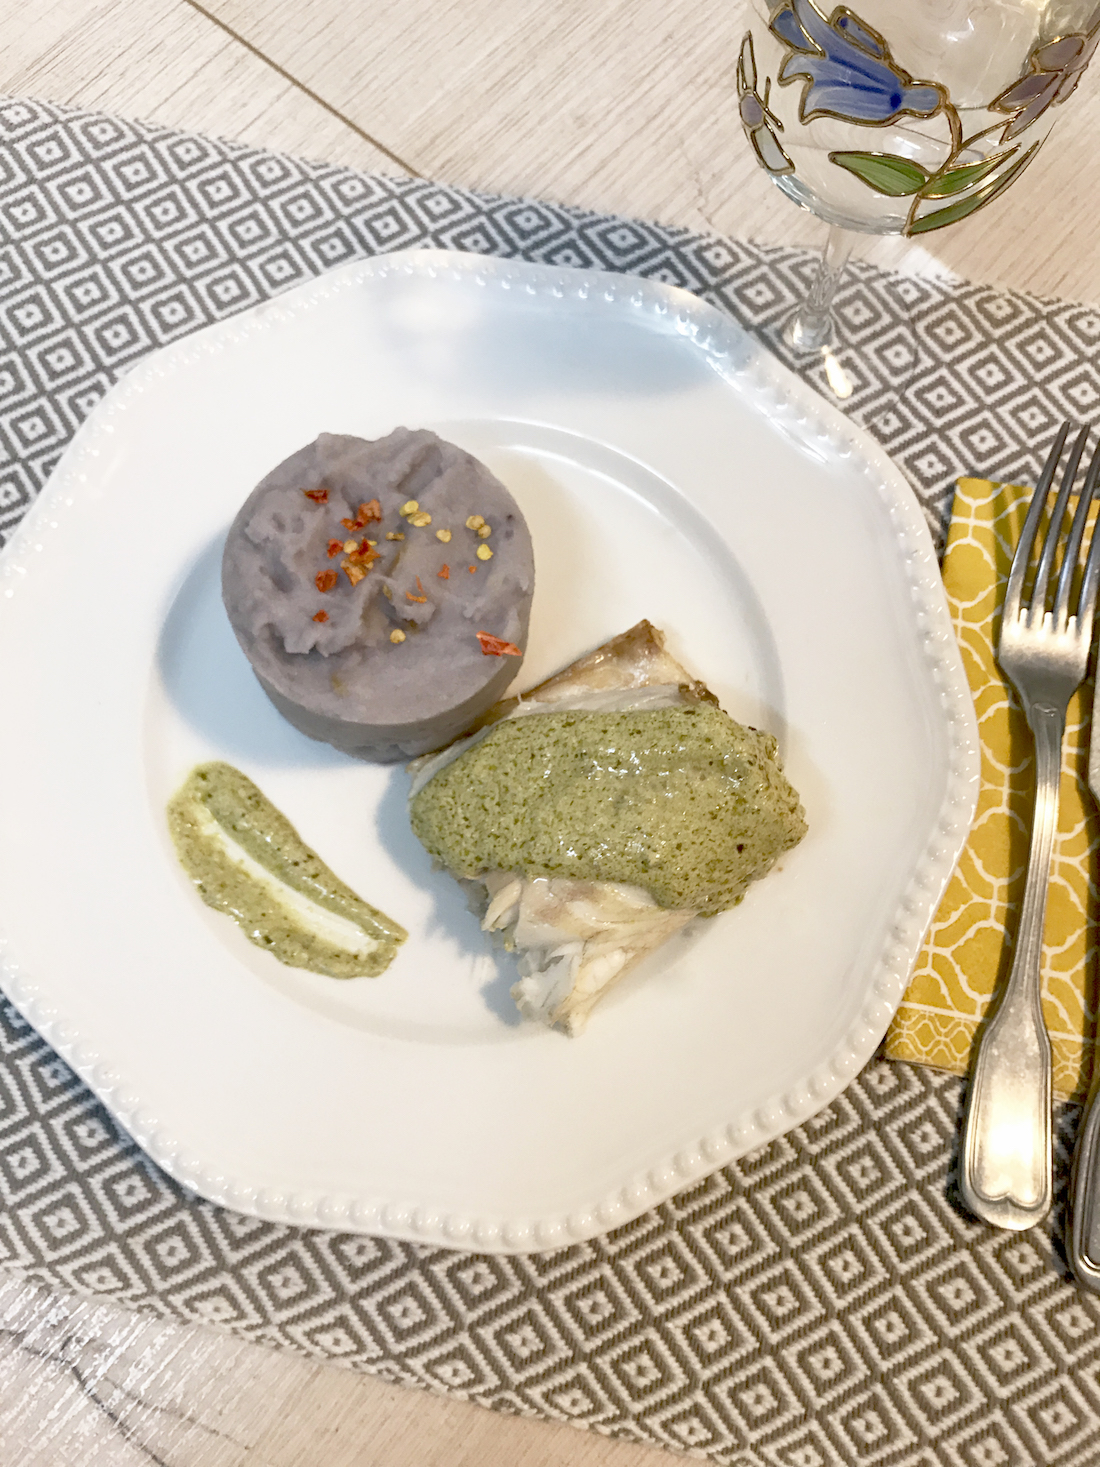 @projectfairytale: Purple Potatoes Puree with Baked Seabass and Green Sauce